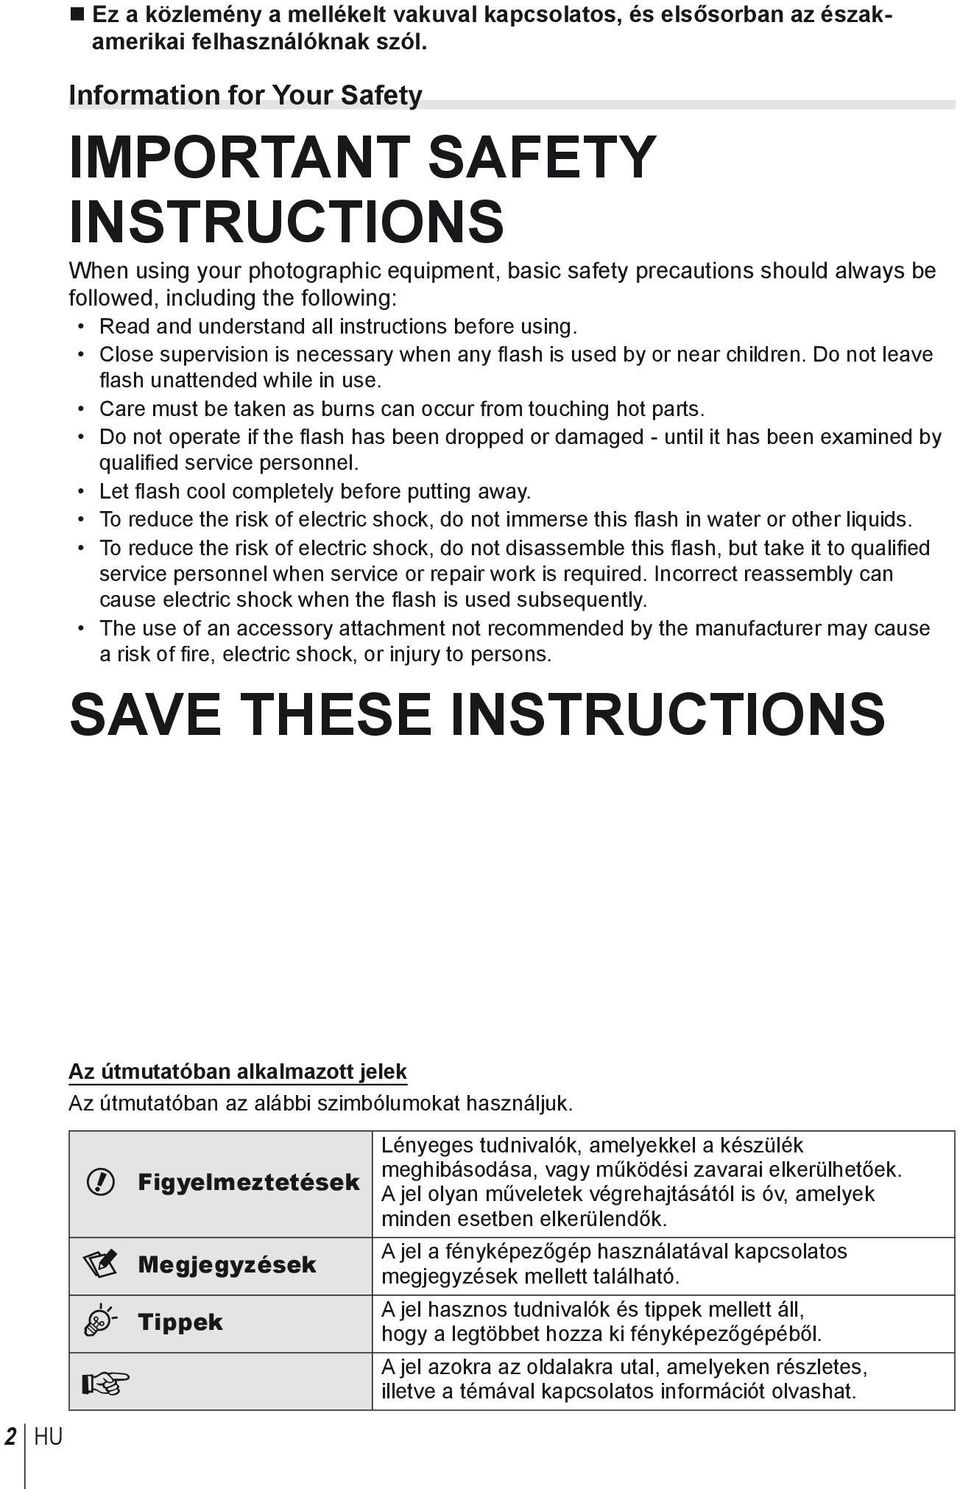 instructions before using. Close supervision is necessary when any flash is used by or near children. Do not leave fl ash unattended while in use.